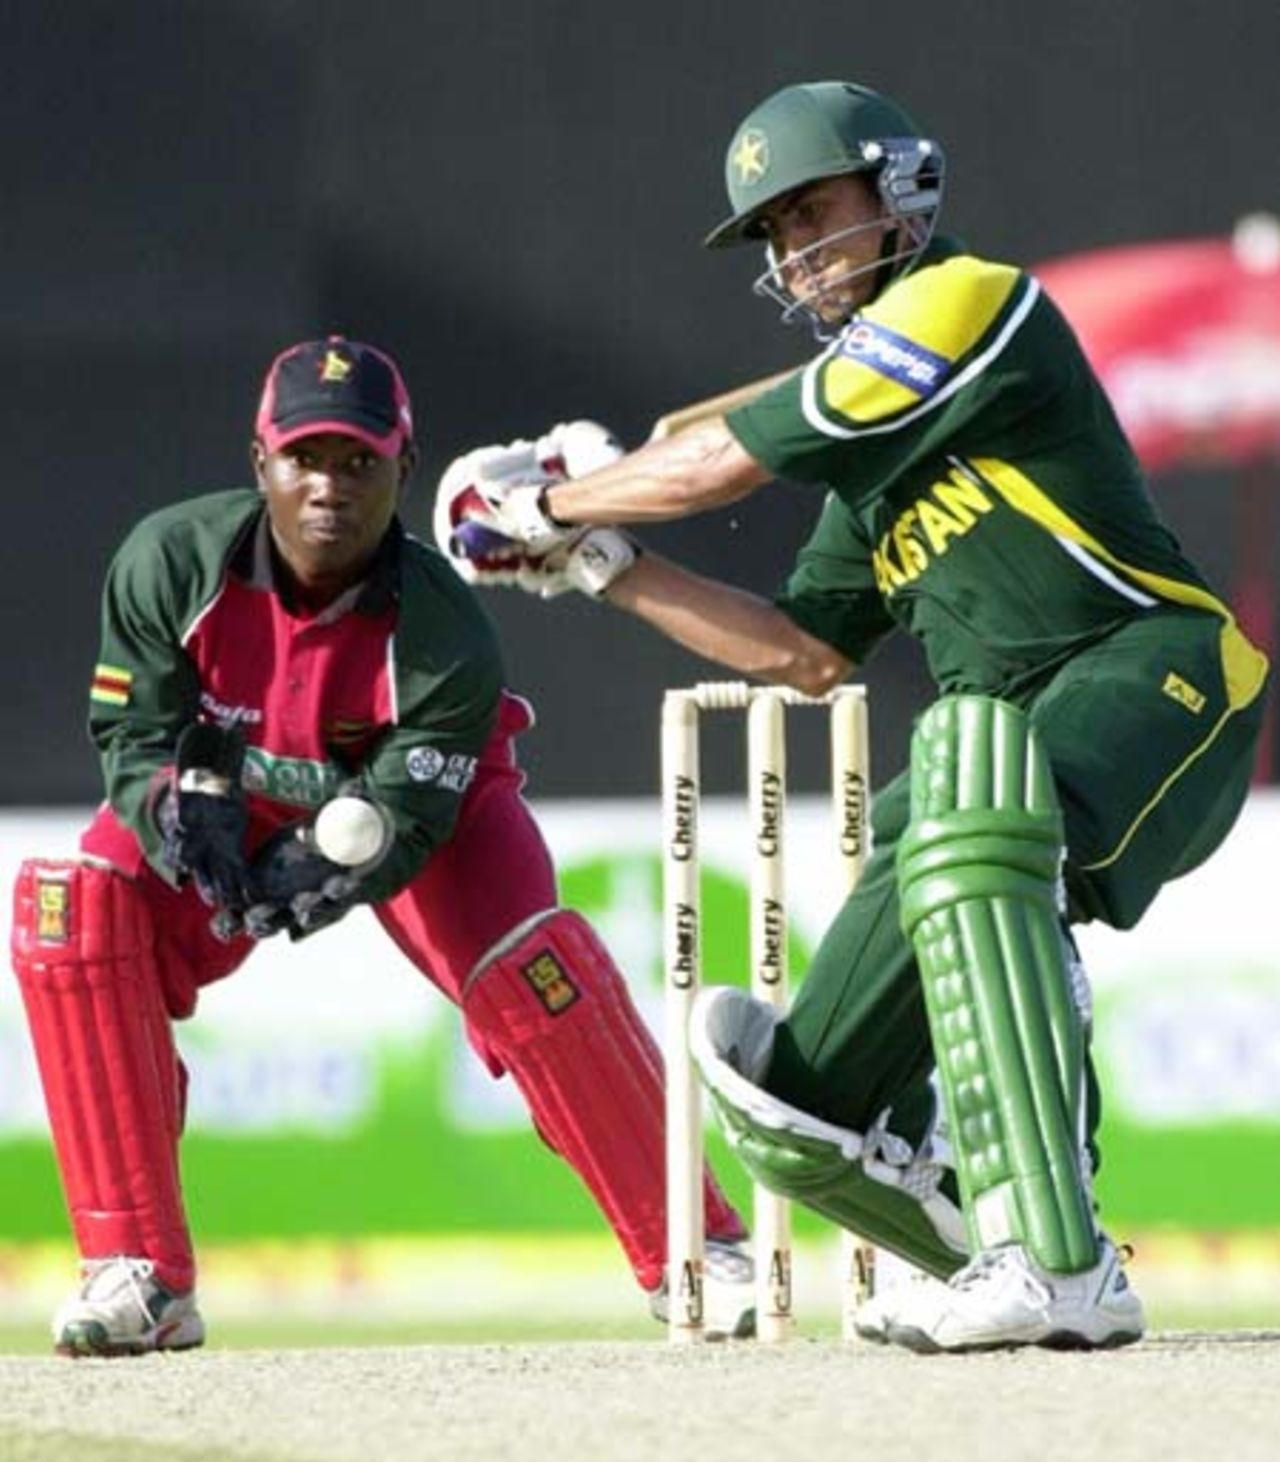 Pakistani middle order batsman Younis Khan (R) plays for a boundary as Zimbabwe wicket keeper Tatenda Taibu keeps his eyes on the ball during the first encounter of the four nation Sharjah Cricket tournament, 03 April 2003.